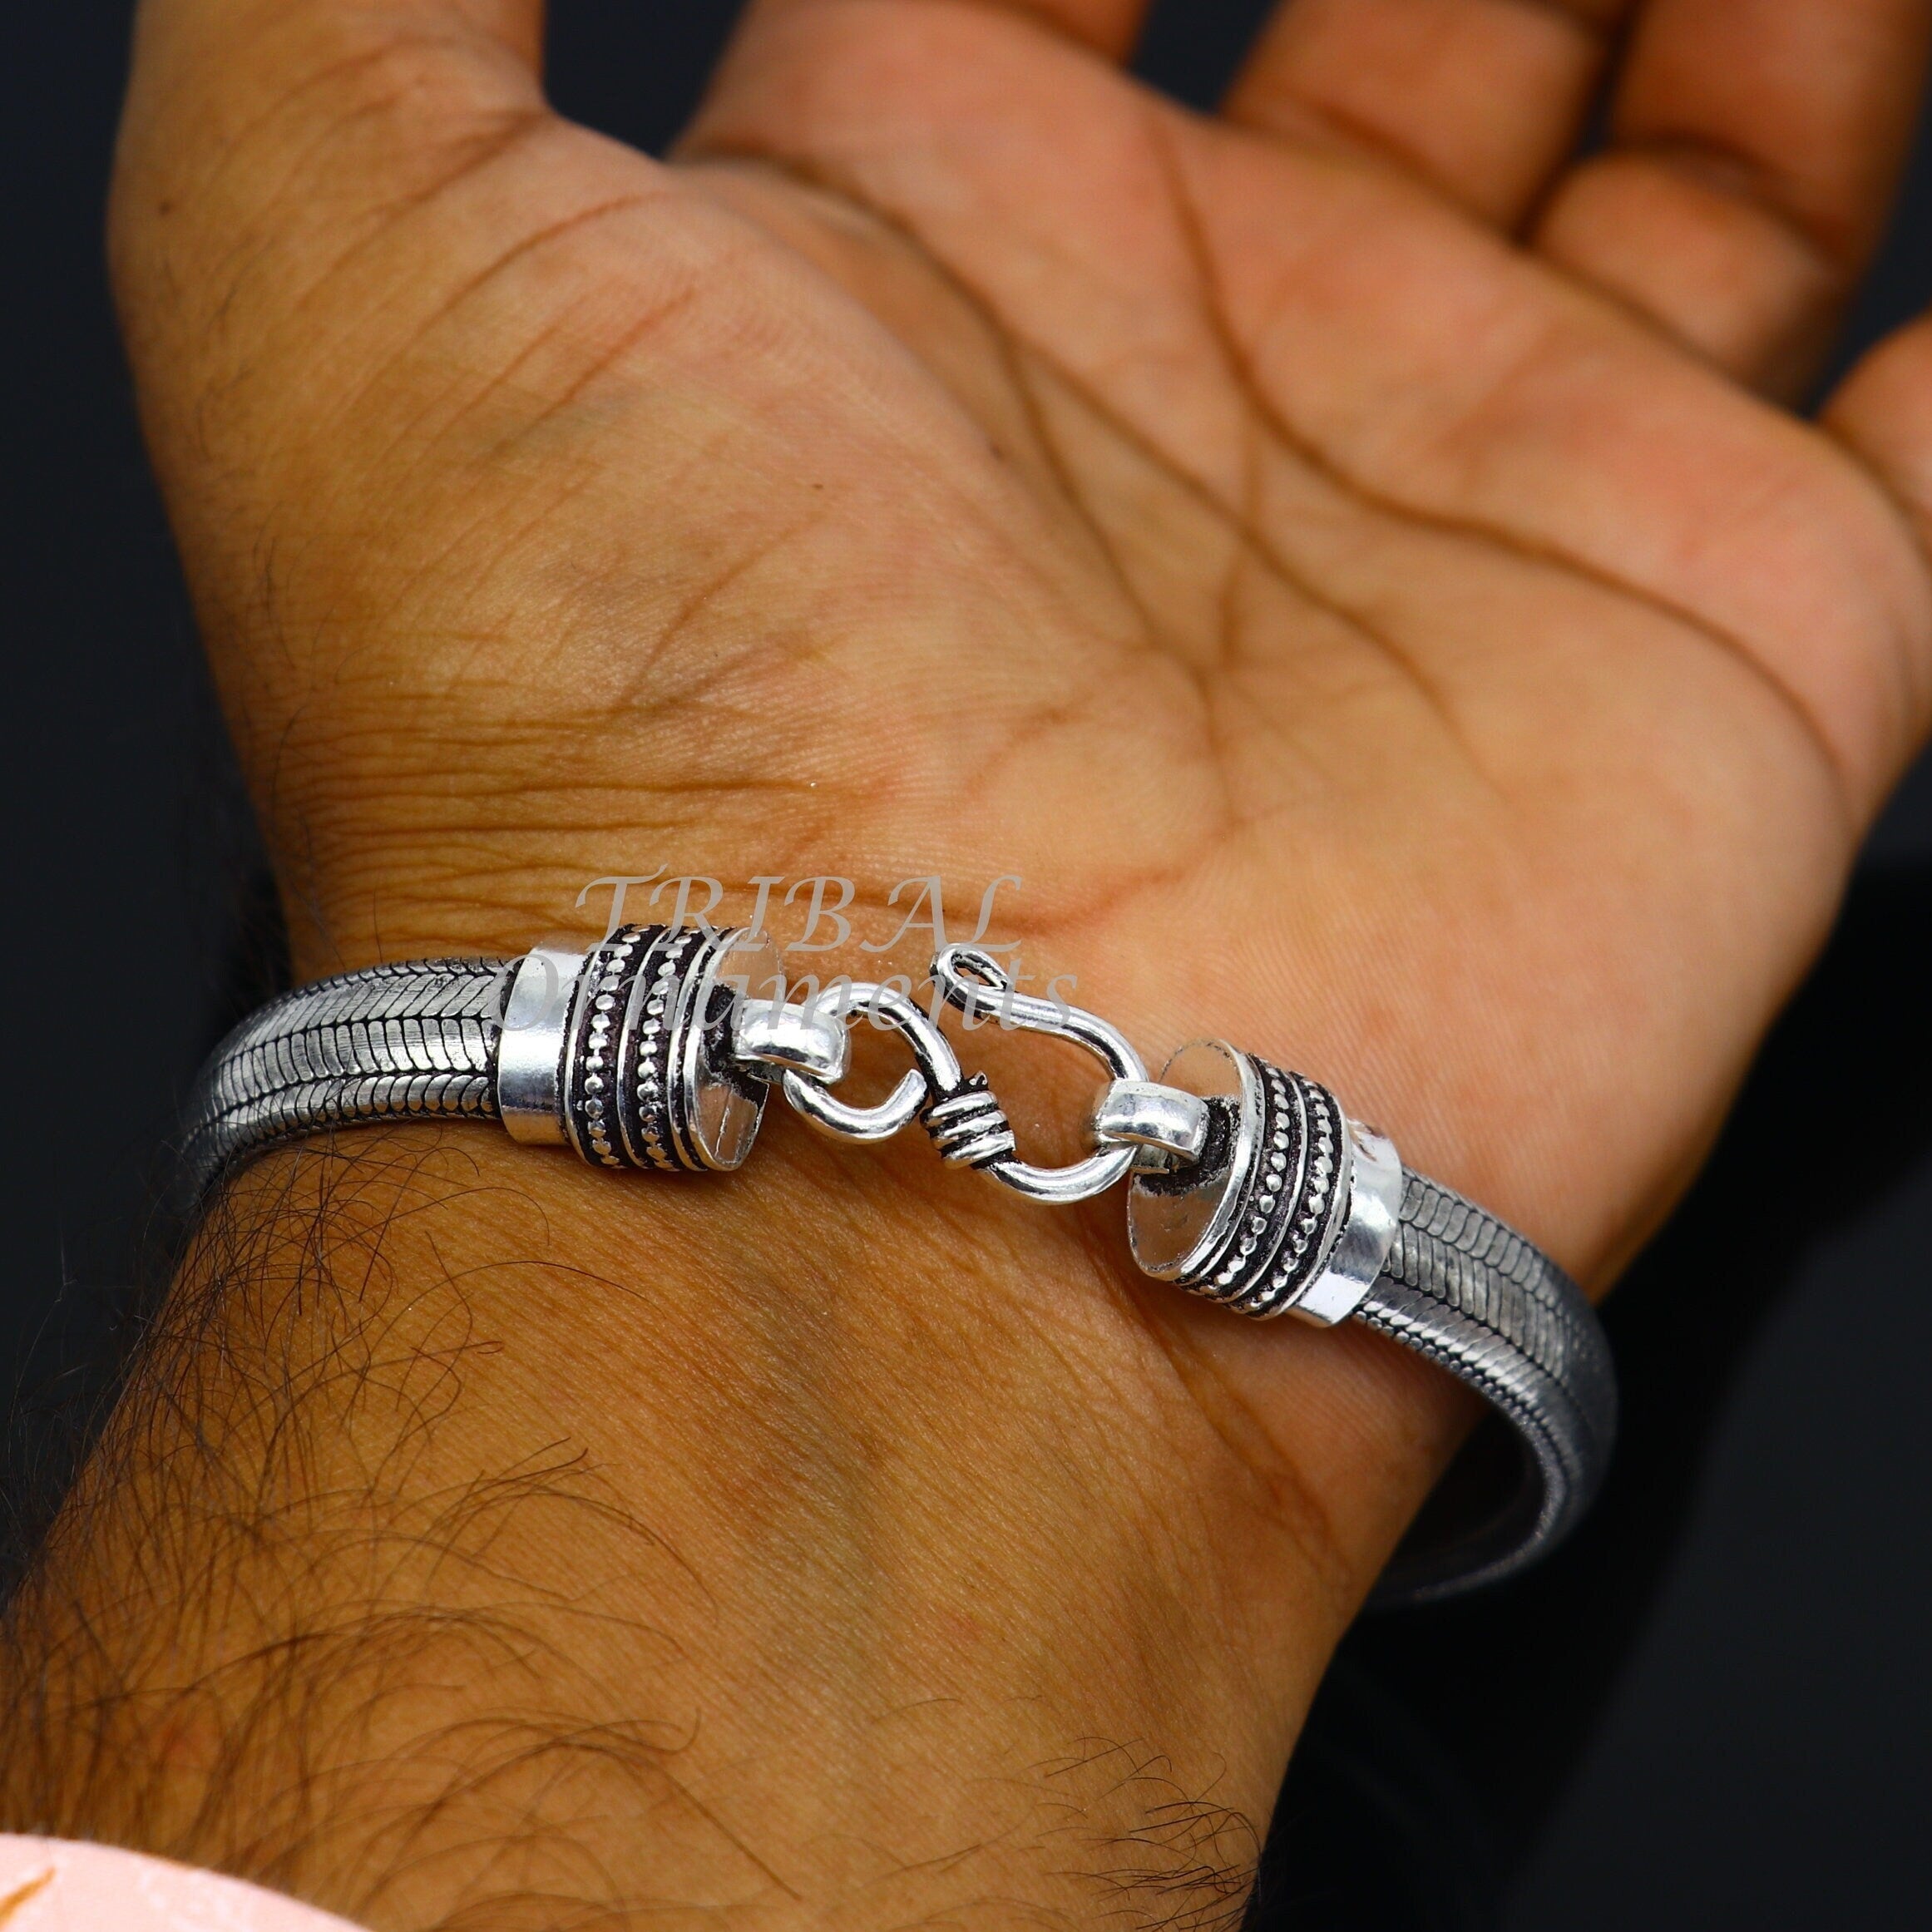 Rajasthan pair of old silver bracelets, India - ethnicadornment